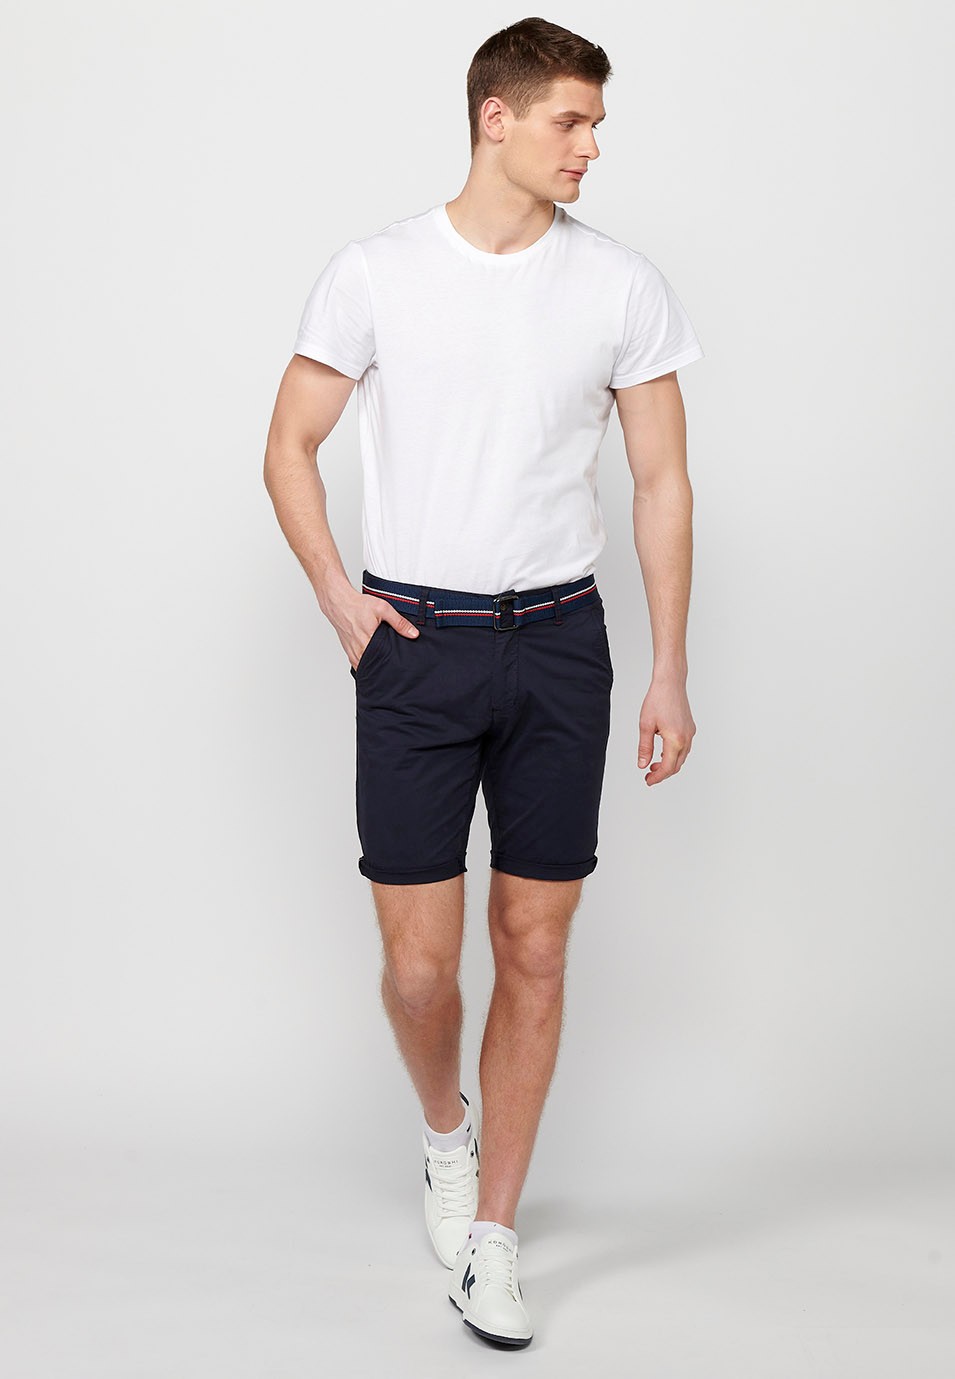 Shorts with turn-up finish with front closure with zipper and button and belt in Navy Color for Men